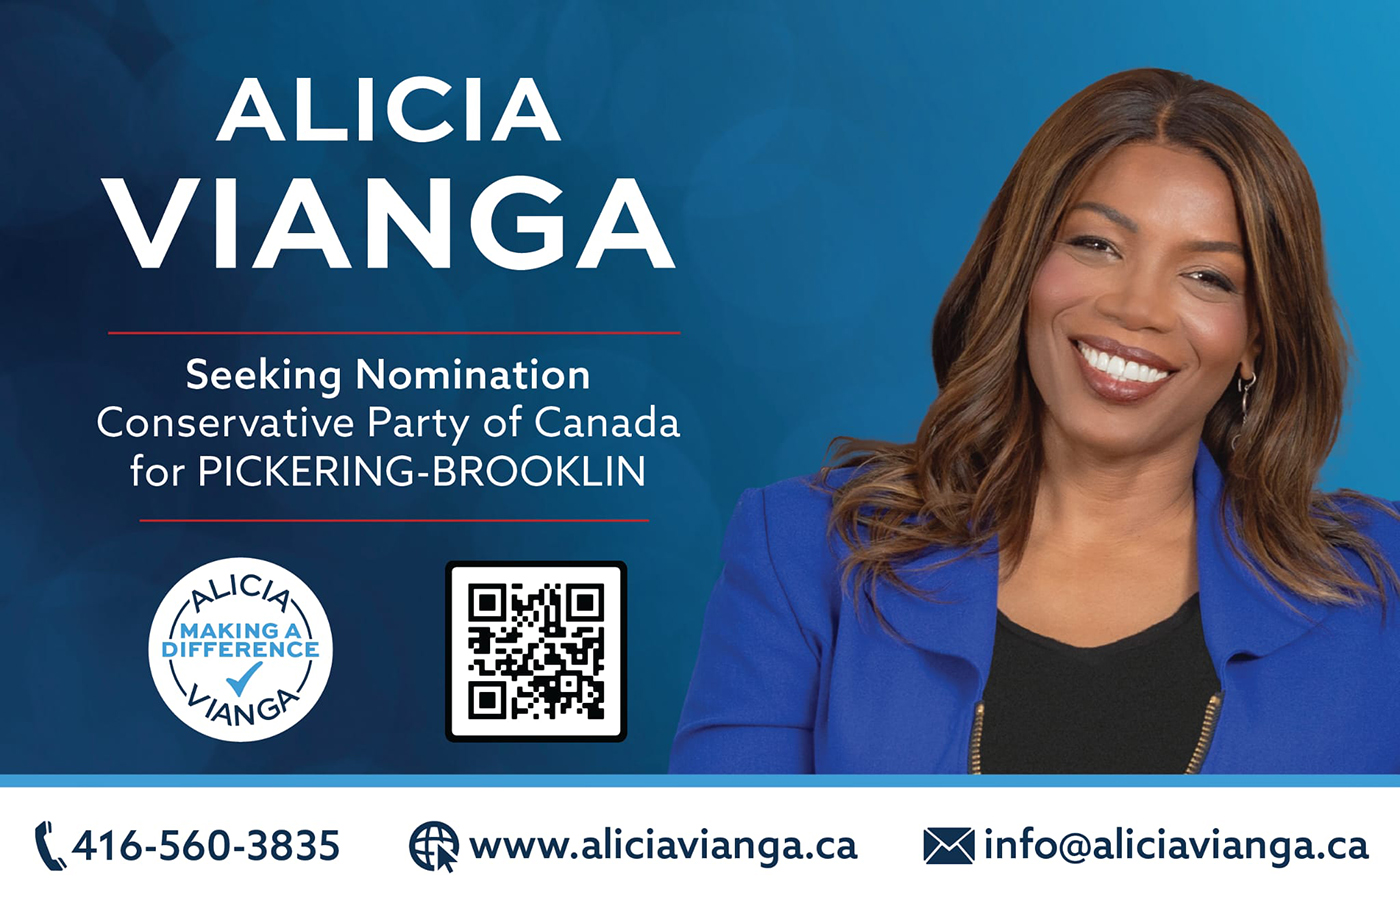 Seeking Nomination Conservative party of Canada for Pickering-Brooklin